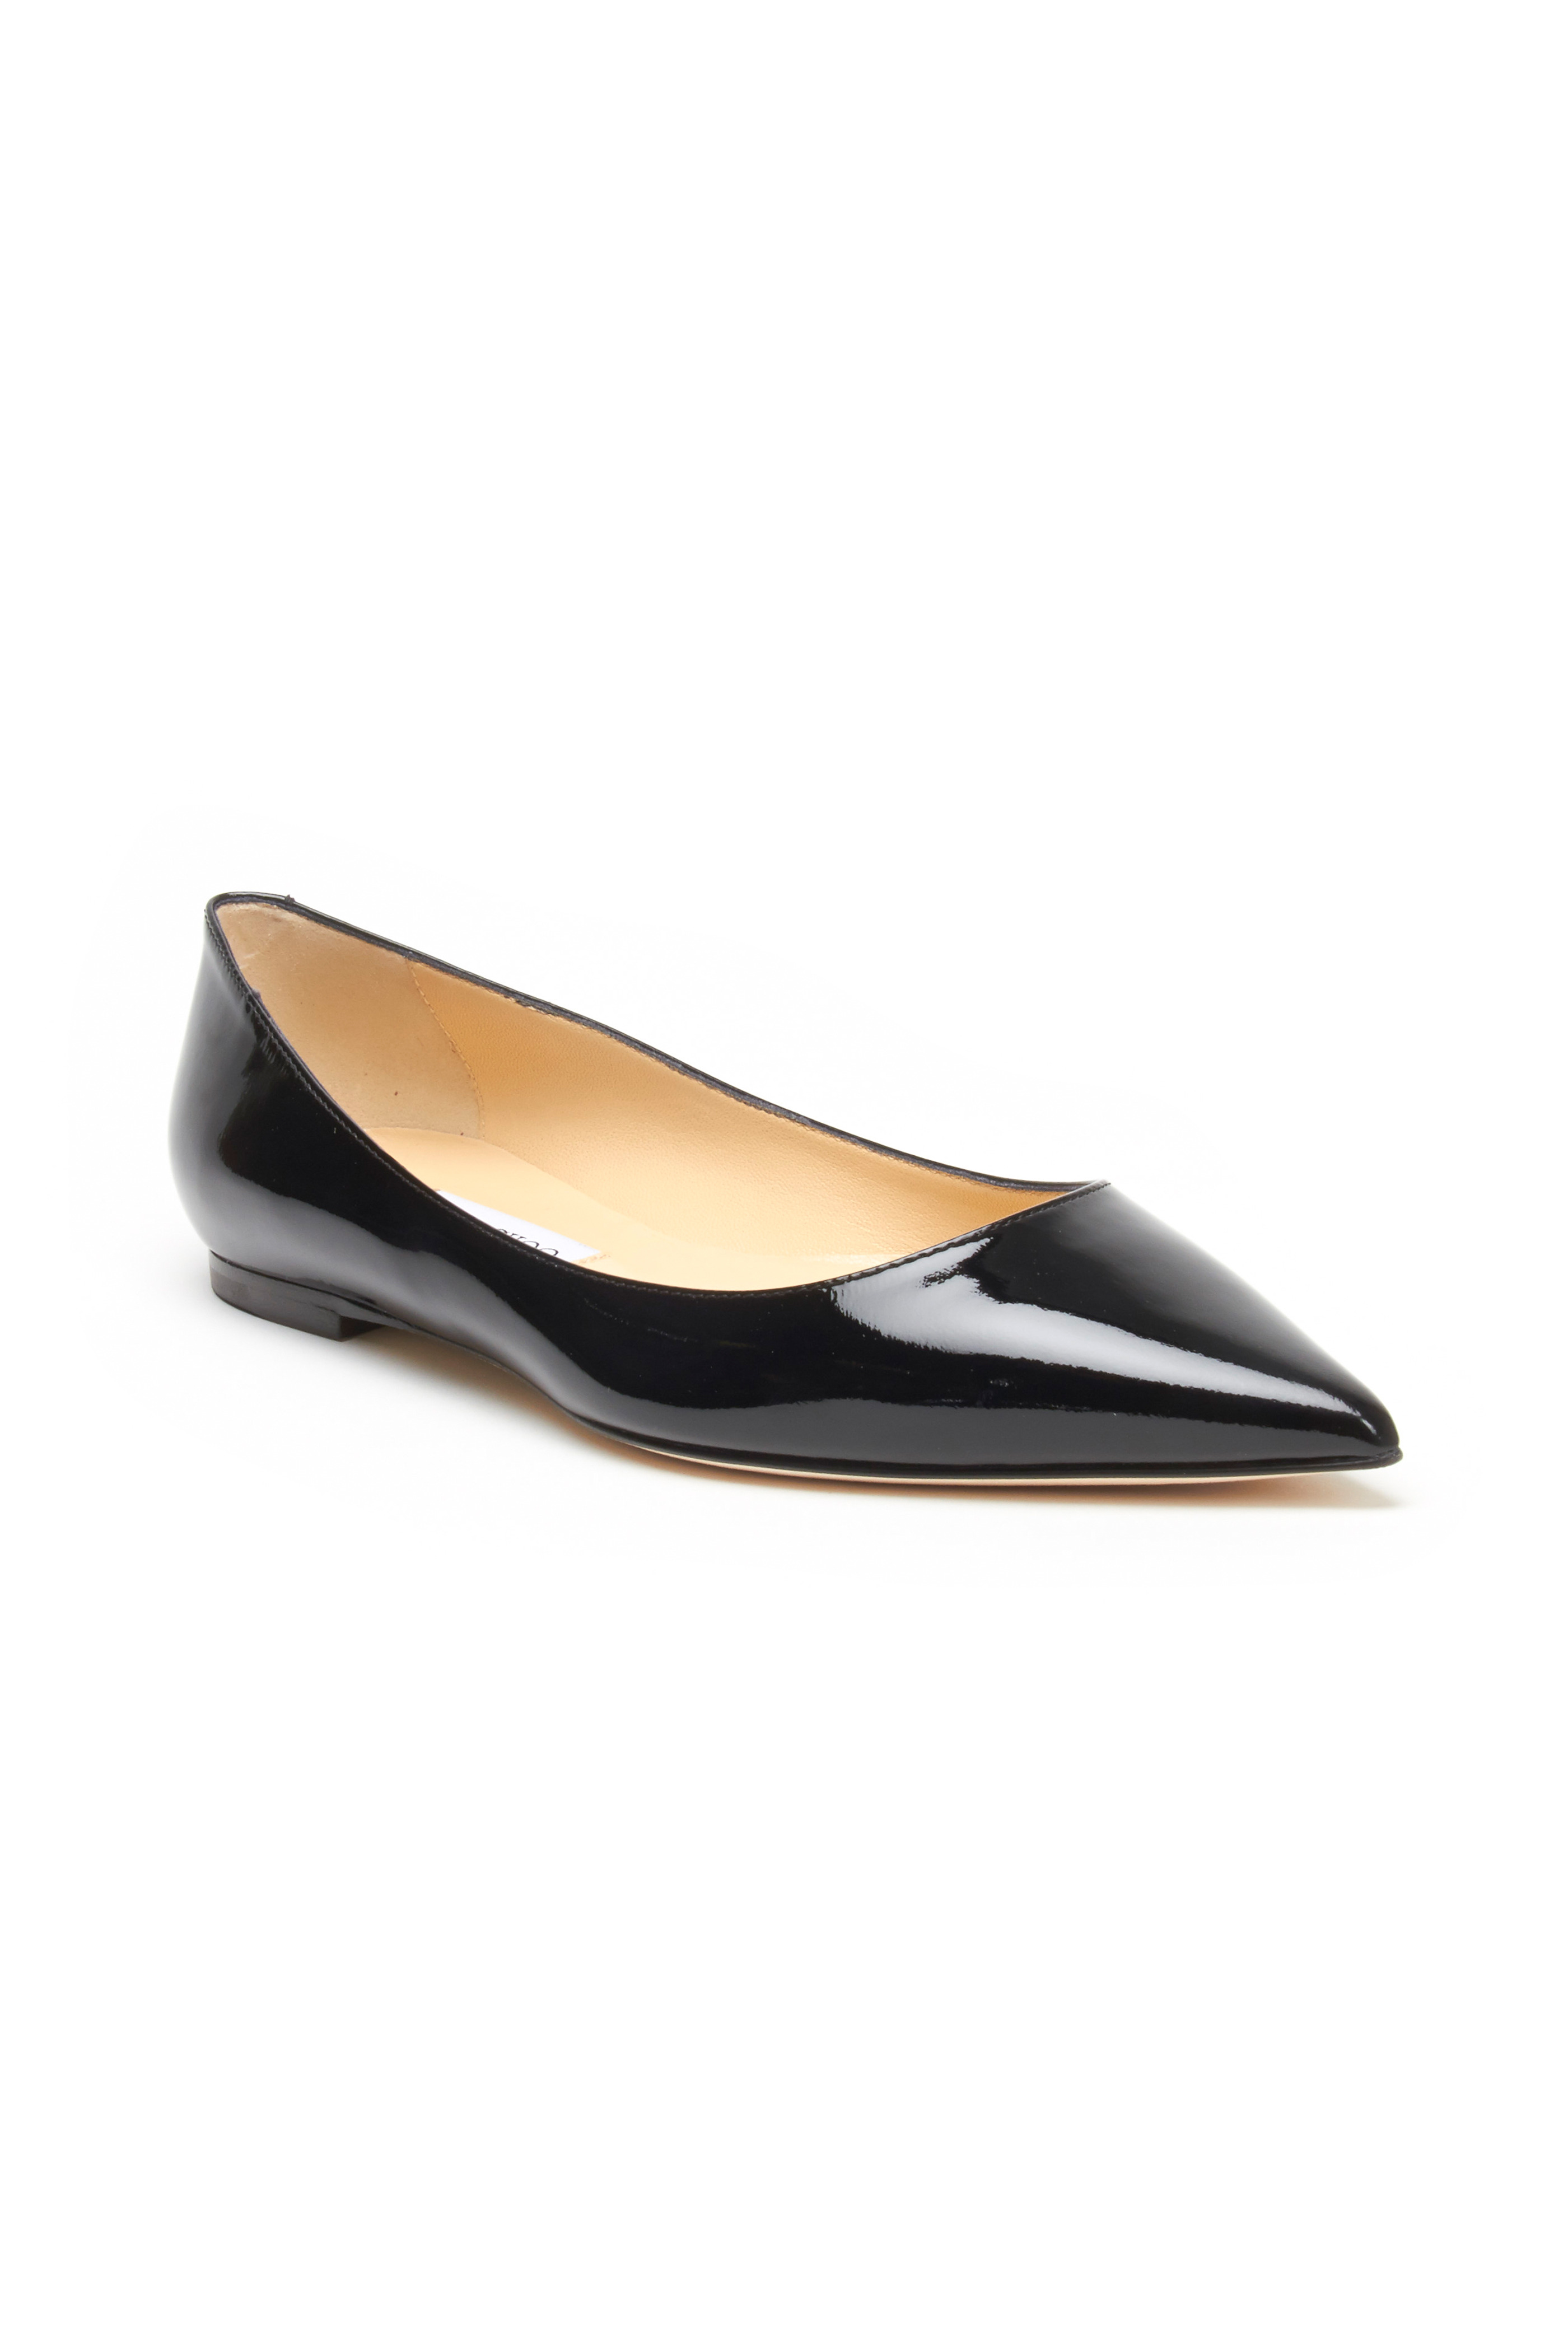 Alina Black Patent Leather Pointed Flats